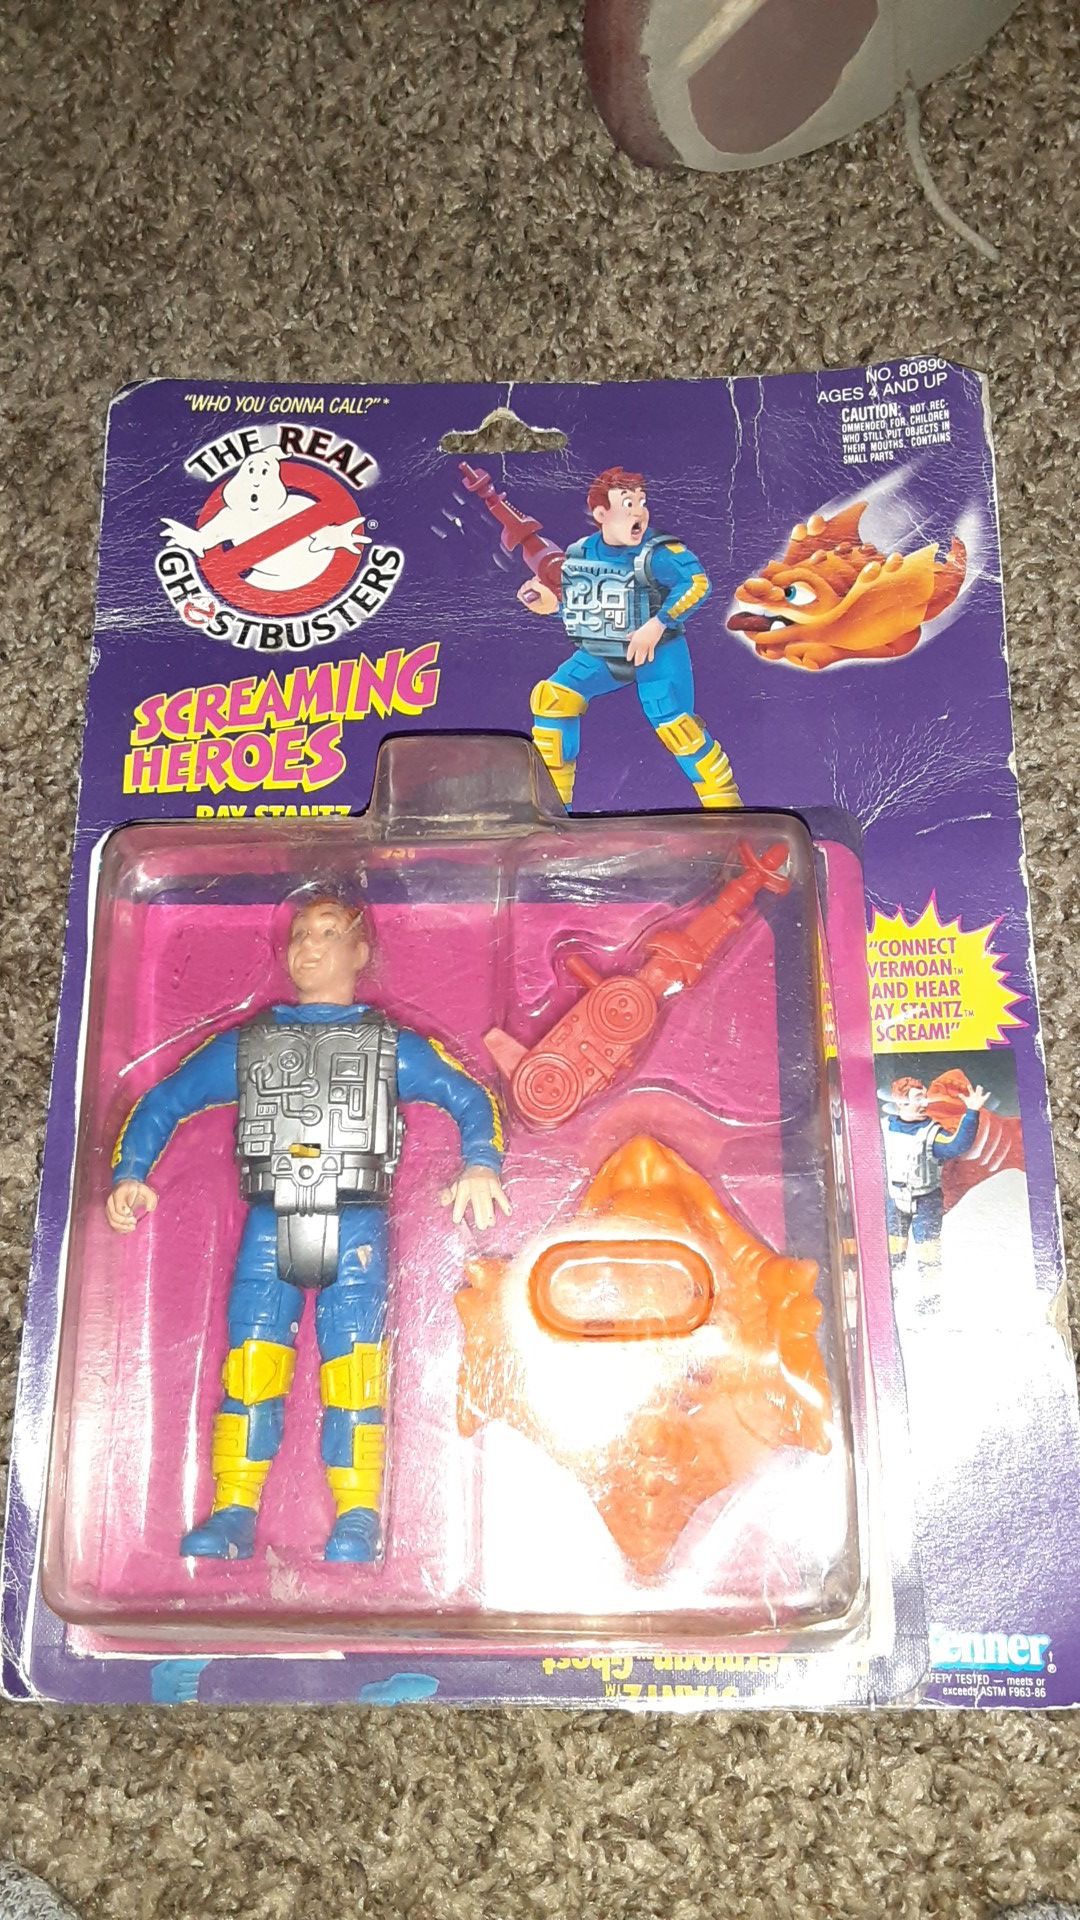 The real ghost busters vintage action figure screaming heroes in box open box no missing pieces